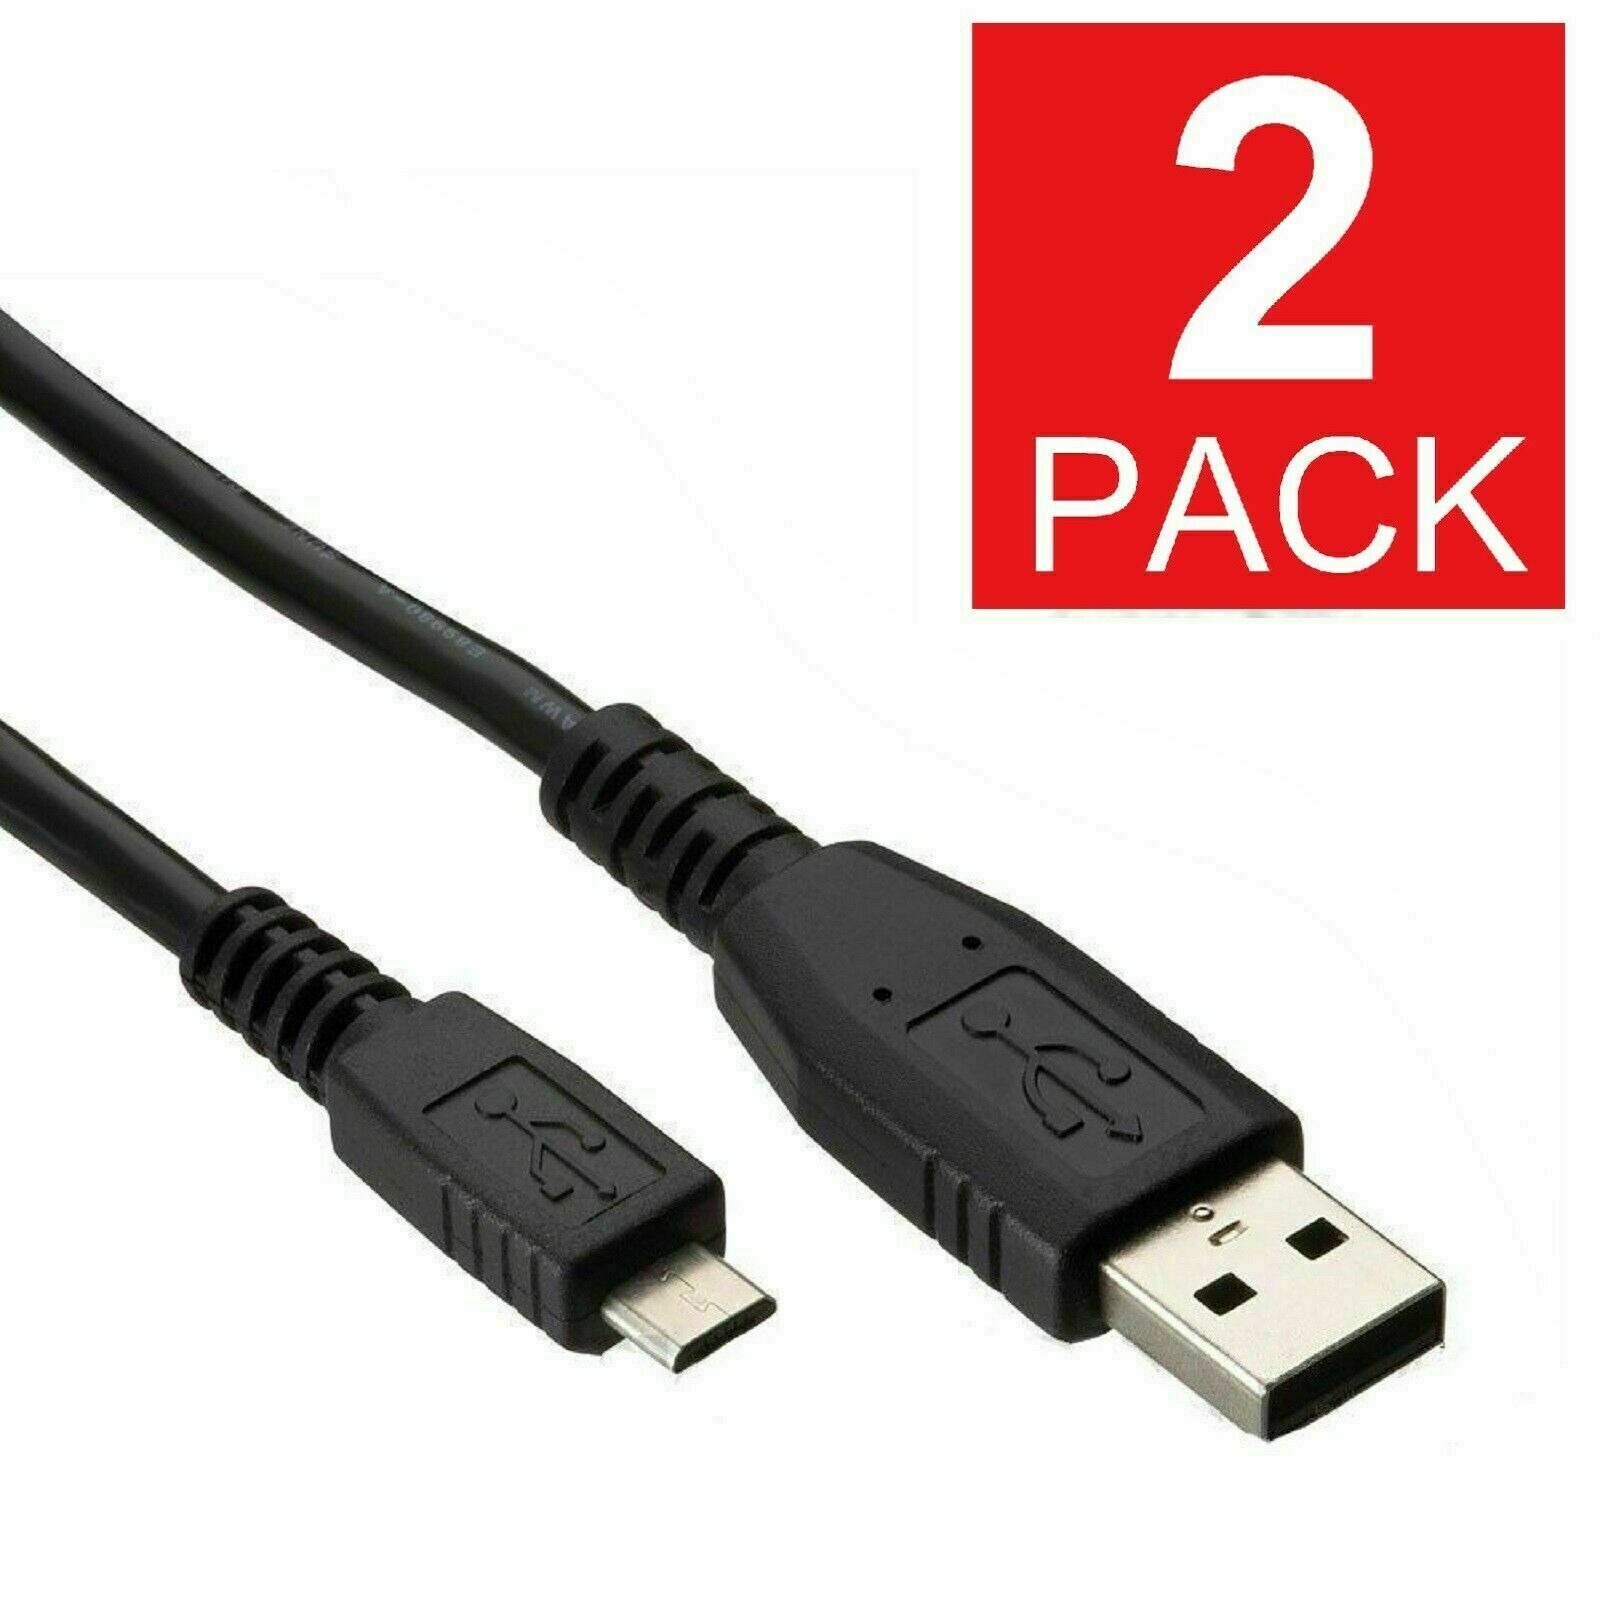 2 Pack Playstation 4 Controller Usb Charge Cable Kmd New (ps4 Charger Cord)